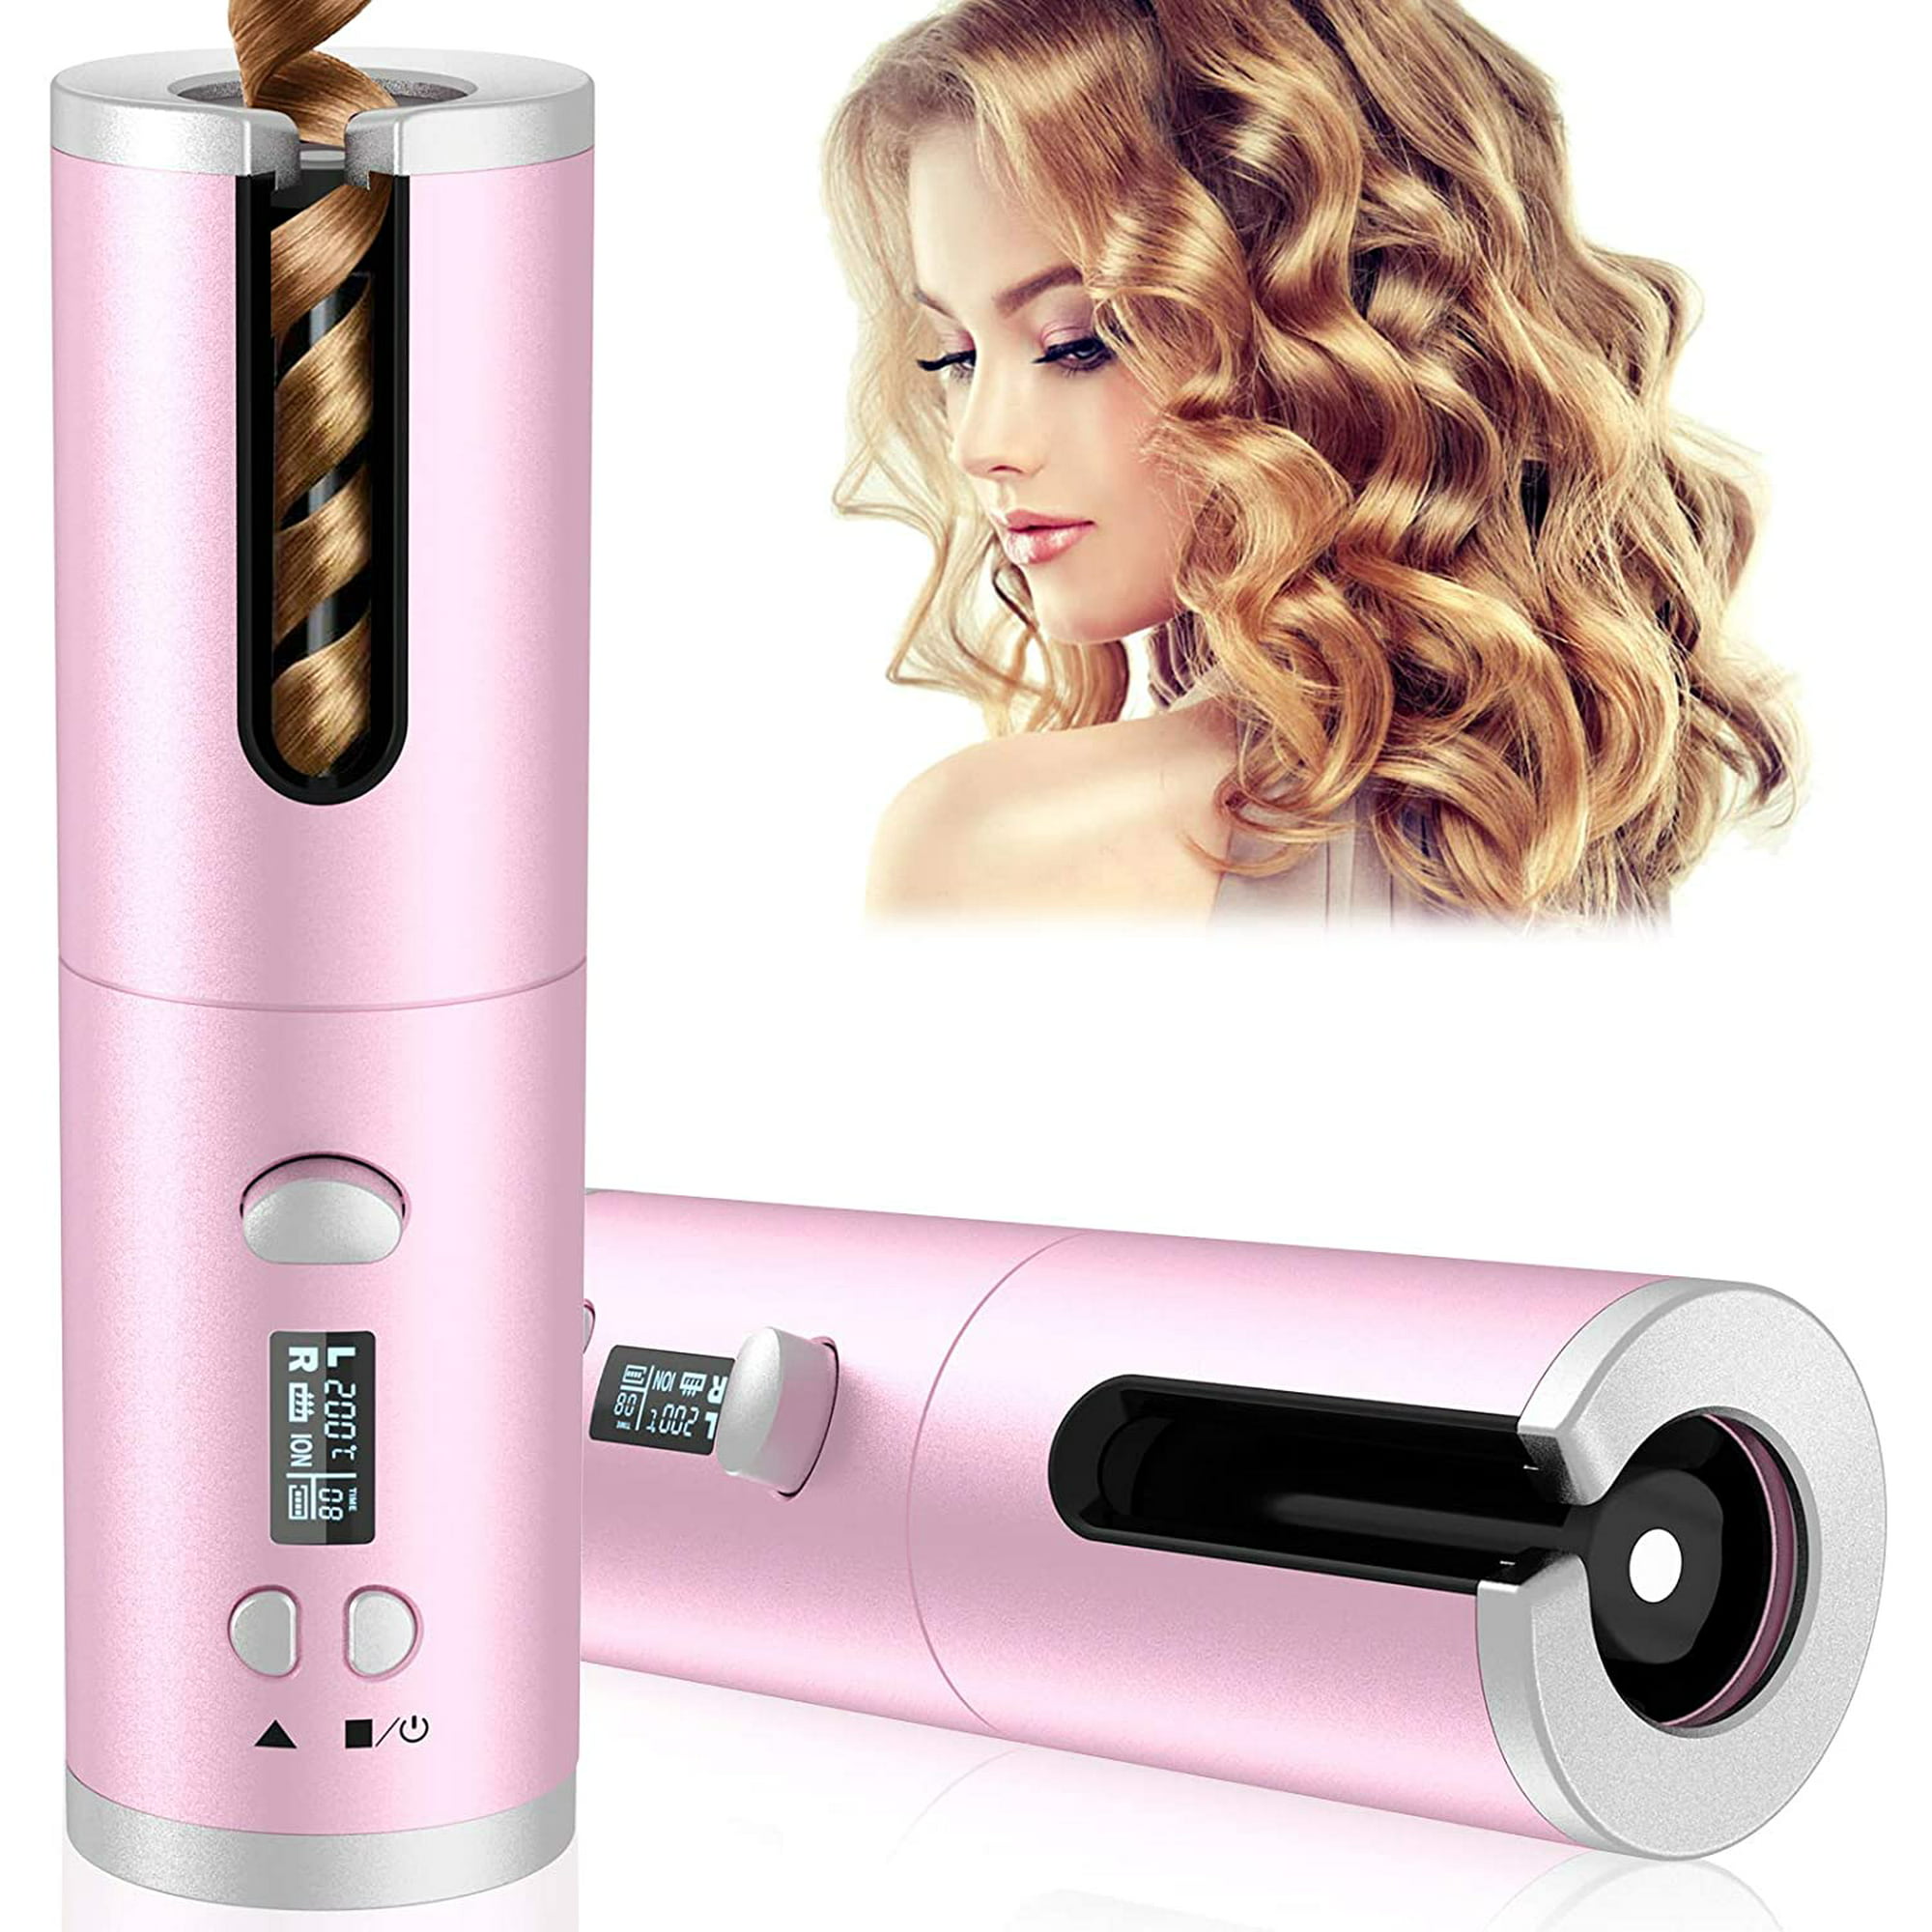 Cordless Auto Hair Curler, Automatic Curling Iron with 6 Temperature &  Timer, Rechargeable and Portable Curling Wand Magic Styling Tools, Fast  Heating Ceramic Barrel for Travel, Home | Walmart Canada